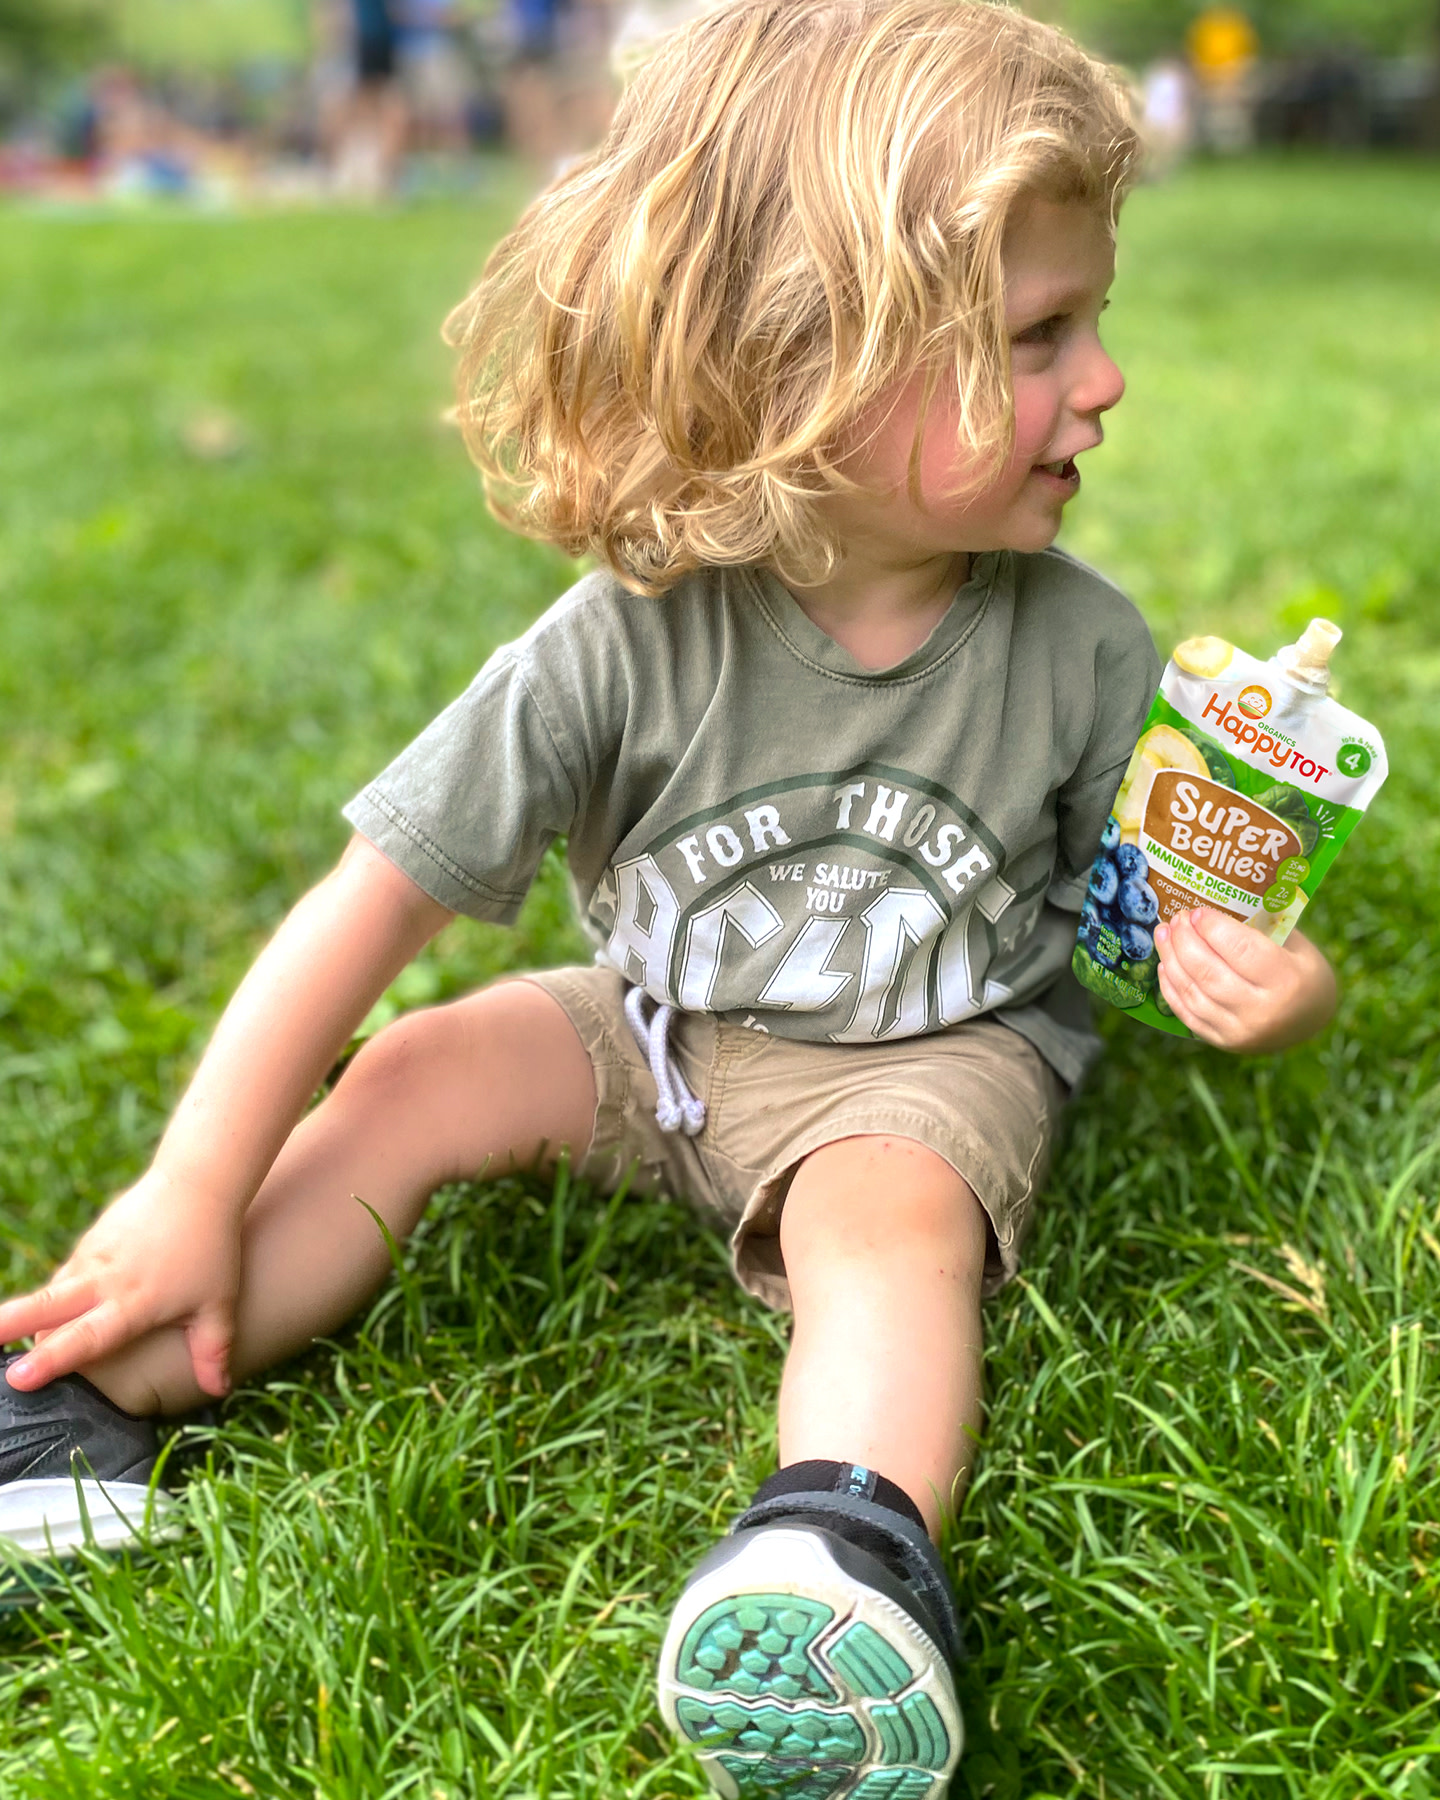 Toddler sitting on grass in park, holding up a Super Bellies pouch and smiling to the left